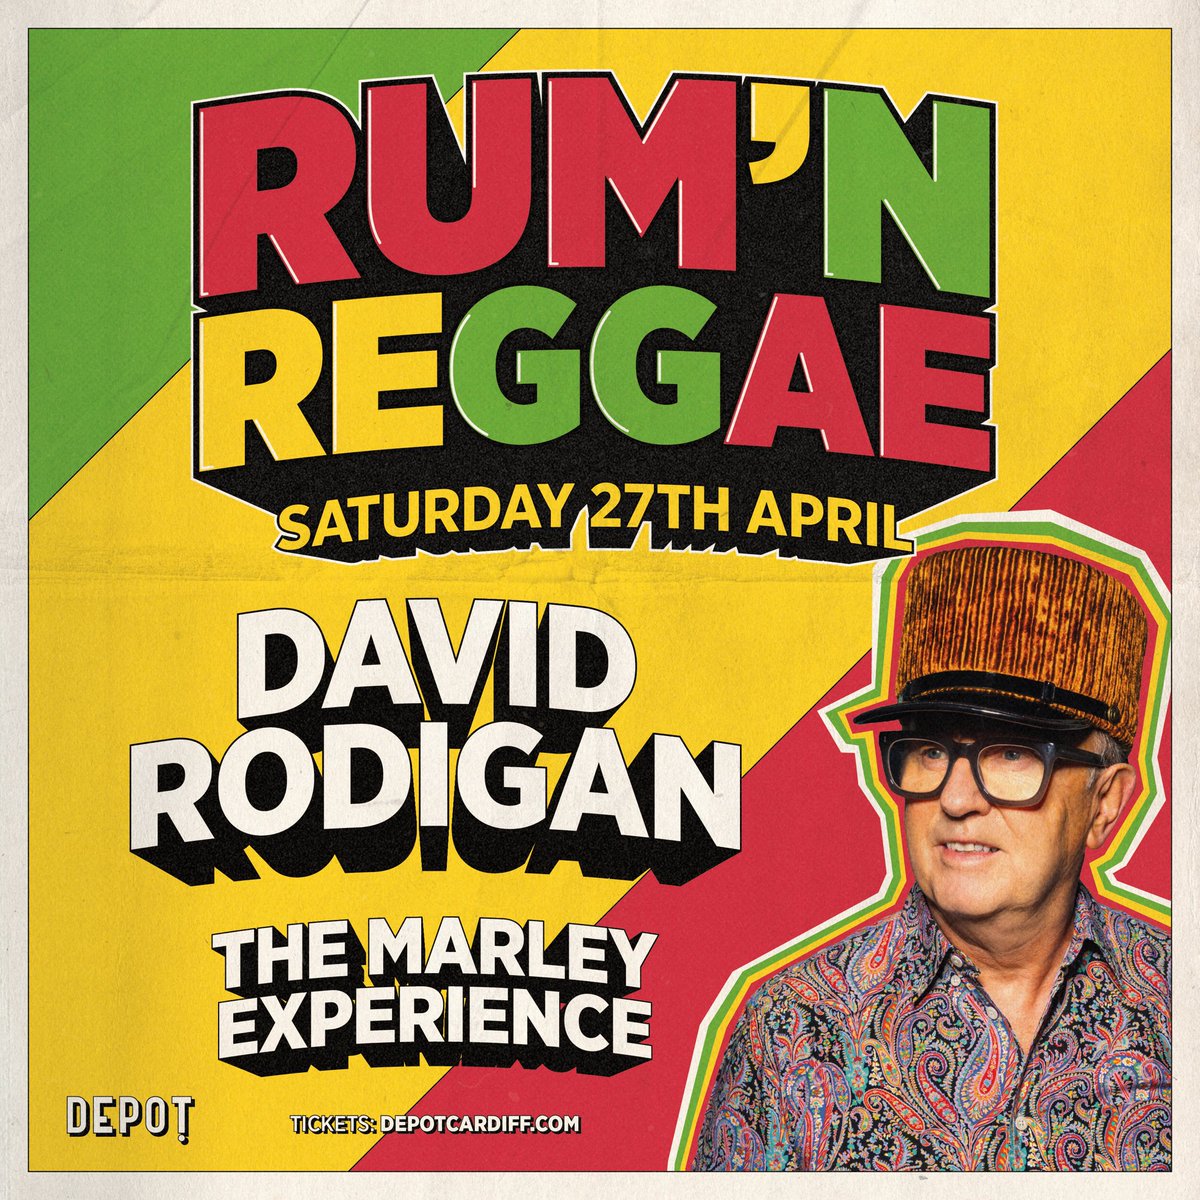 Save the date for a night of tropical beats and Caribbean heat! 🔥🏝️ Sat 27th April our Rum & Reggae festival returns with an evening of tasty food, great rum and plenty of jammin' w/ headline artist @DavidRodigan 🎶 Tickets available now via - depotlive.co.uk